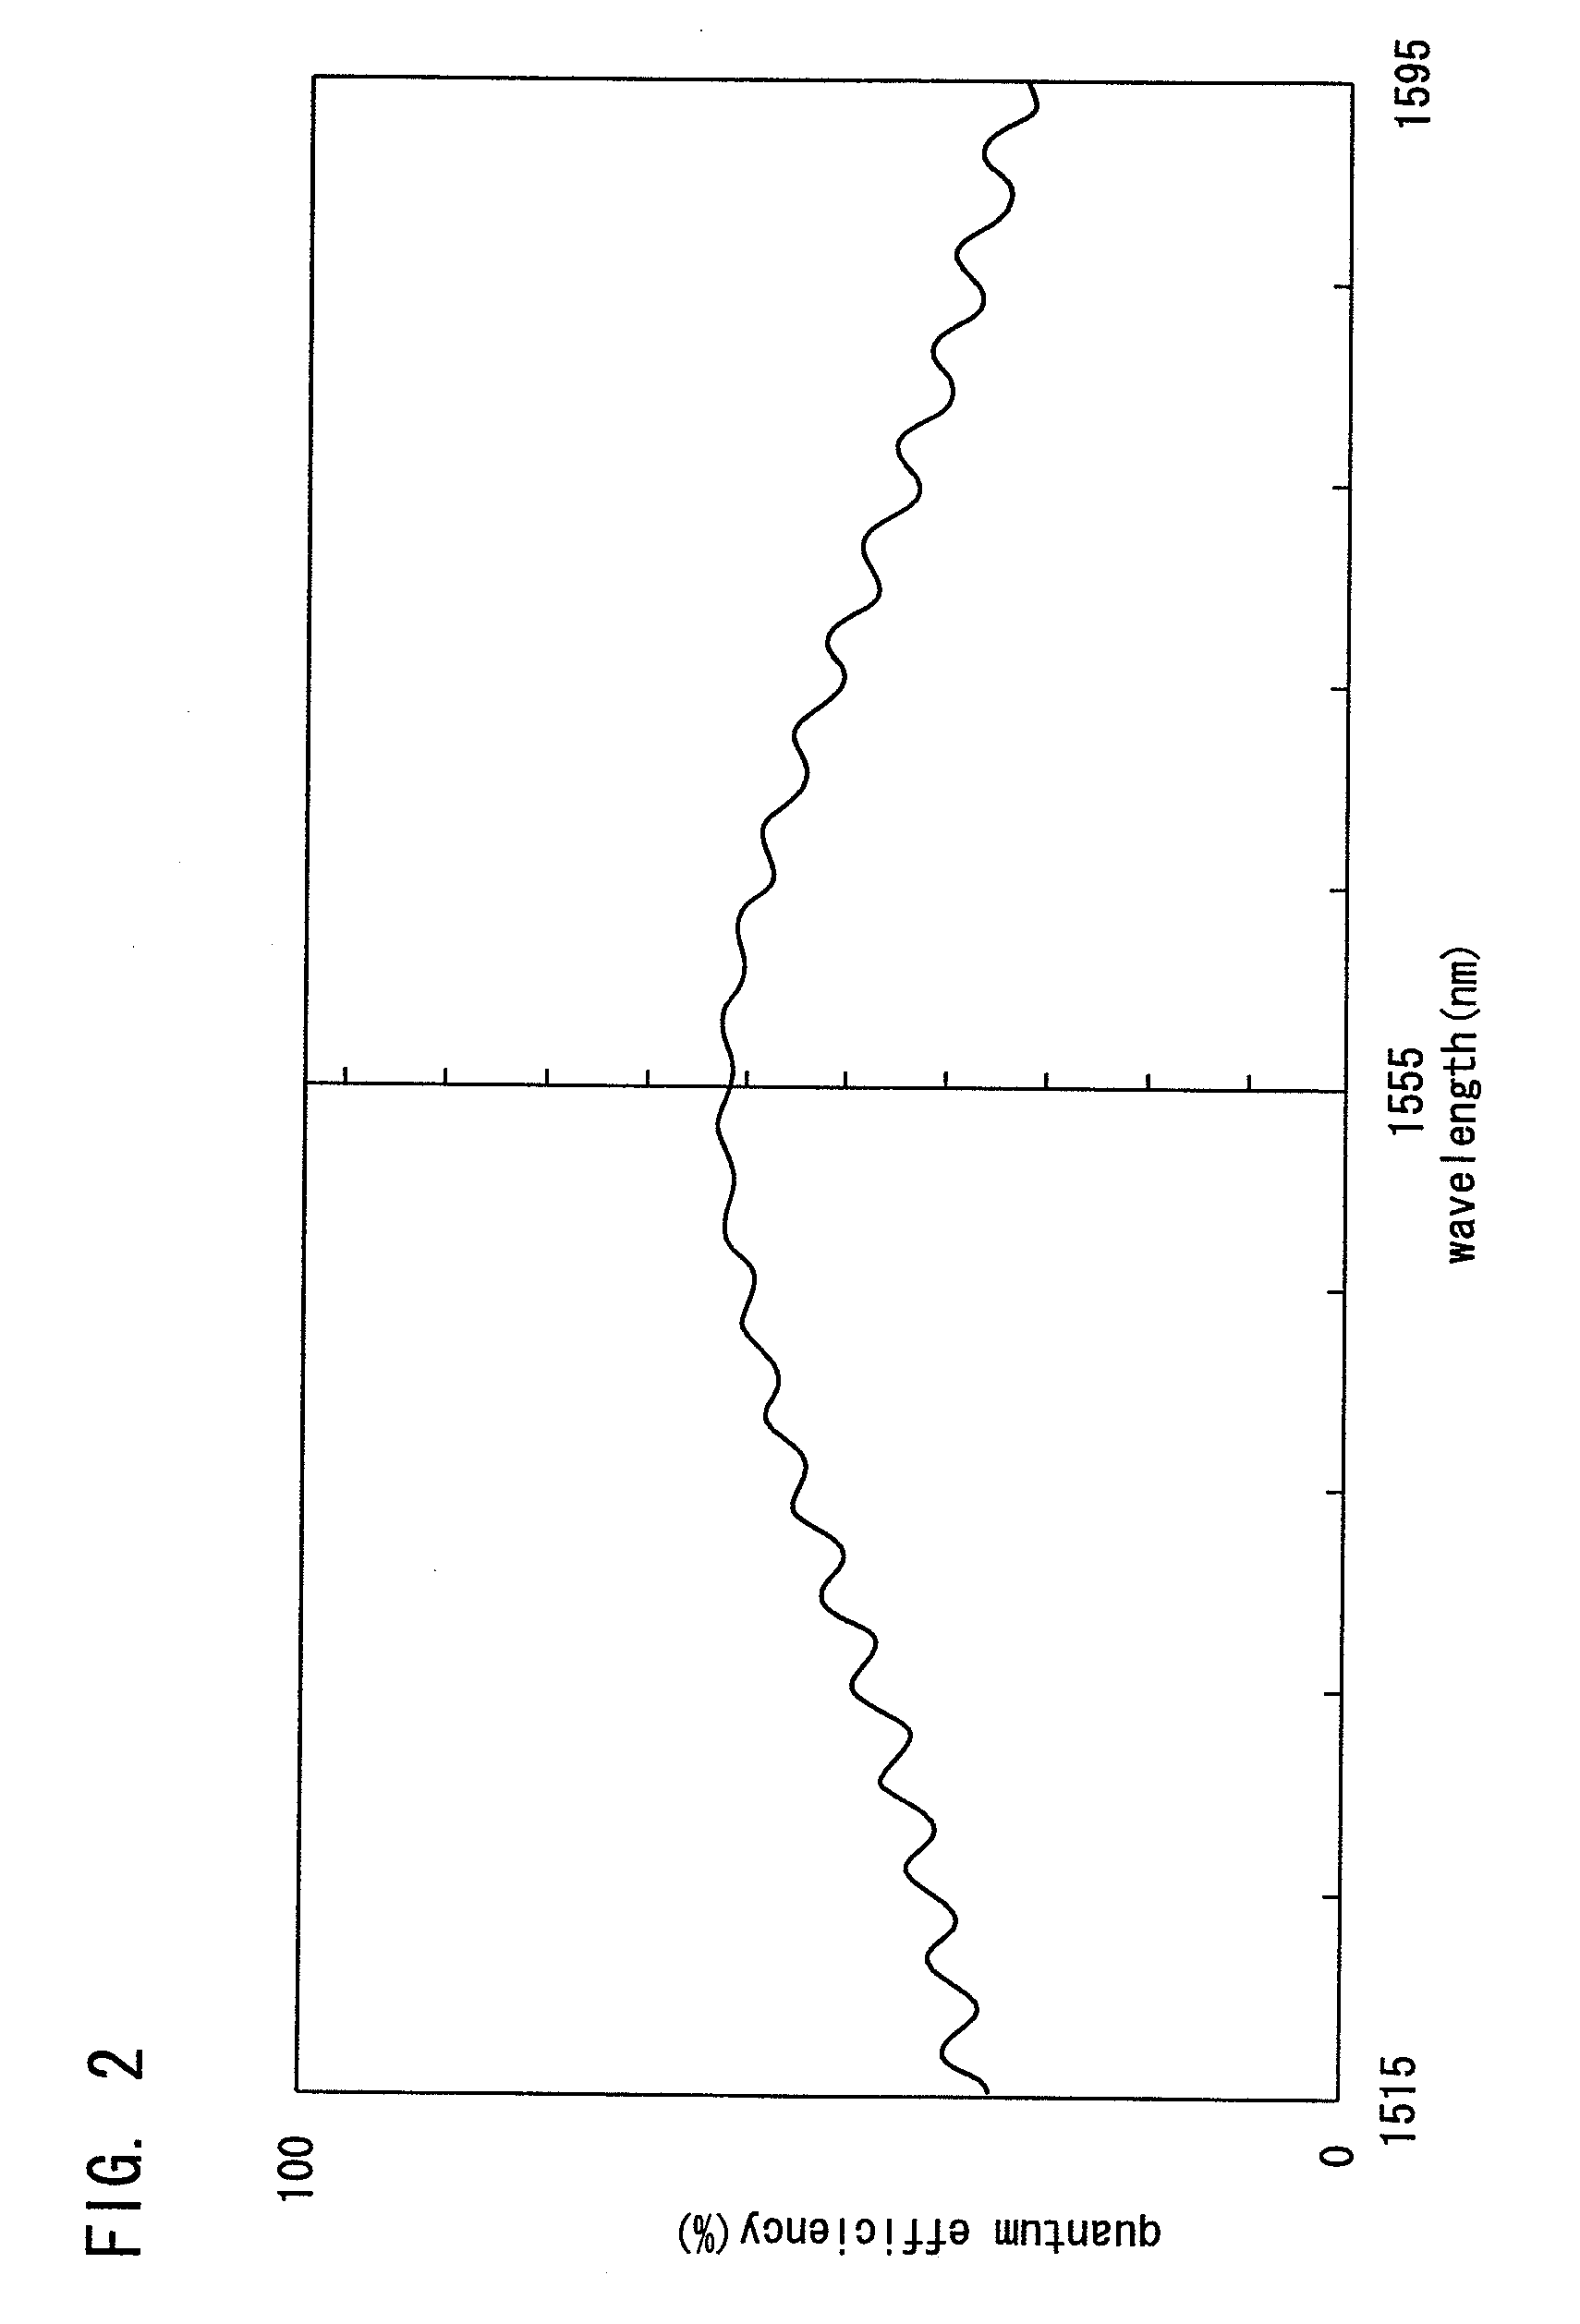 Semiconductor light receiving element